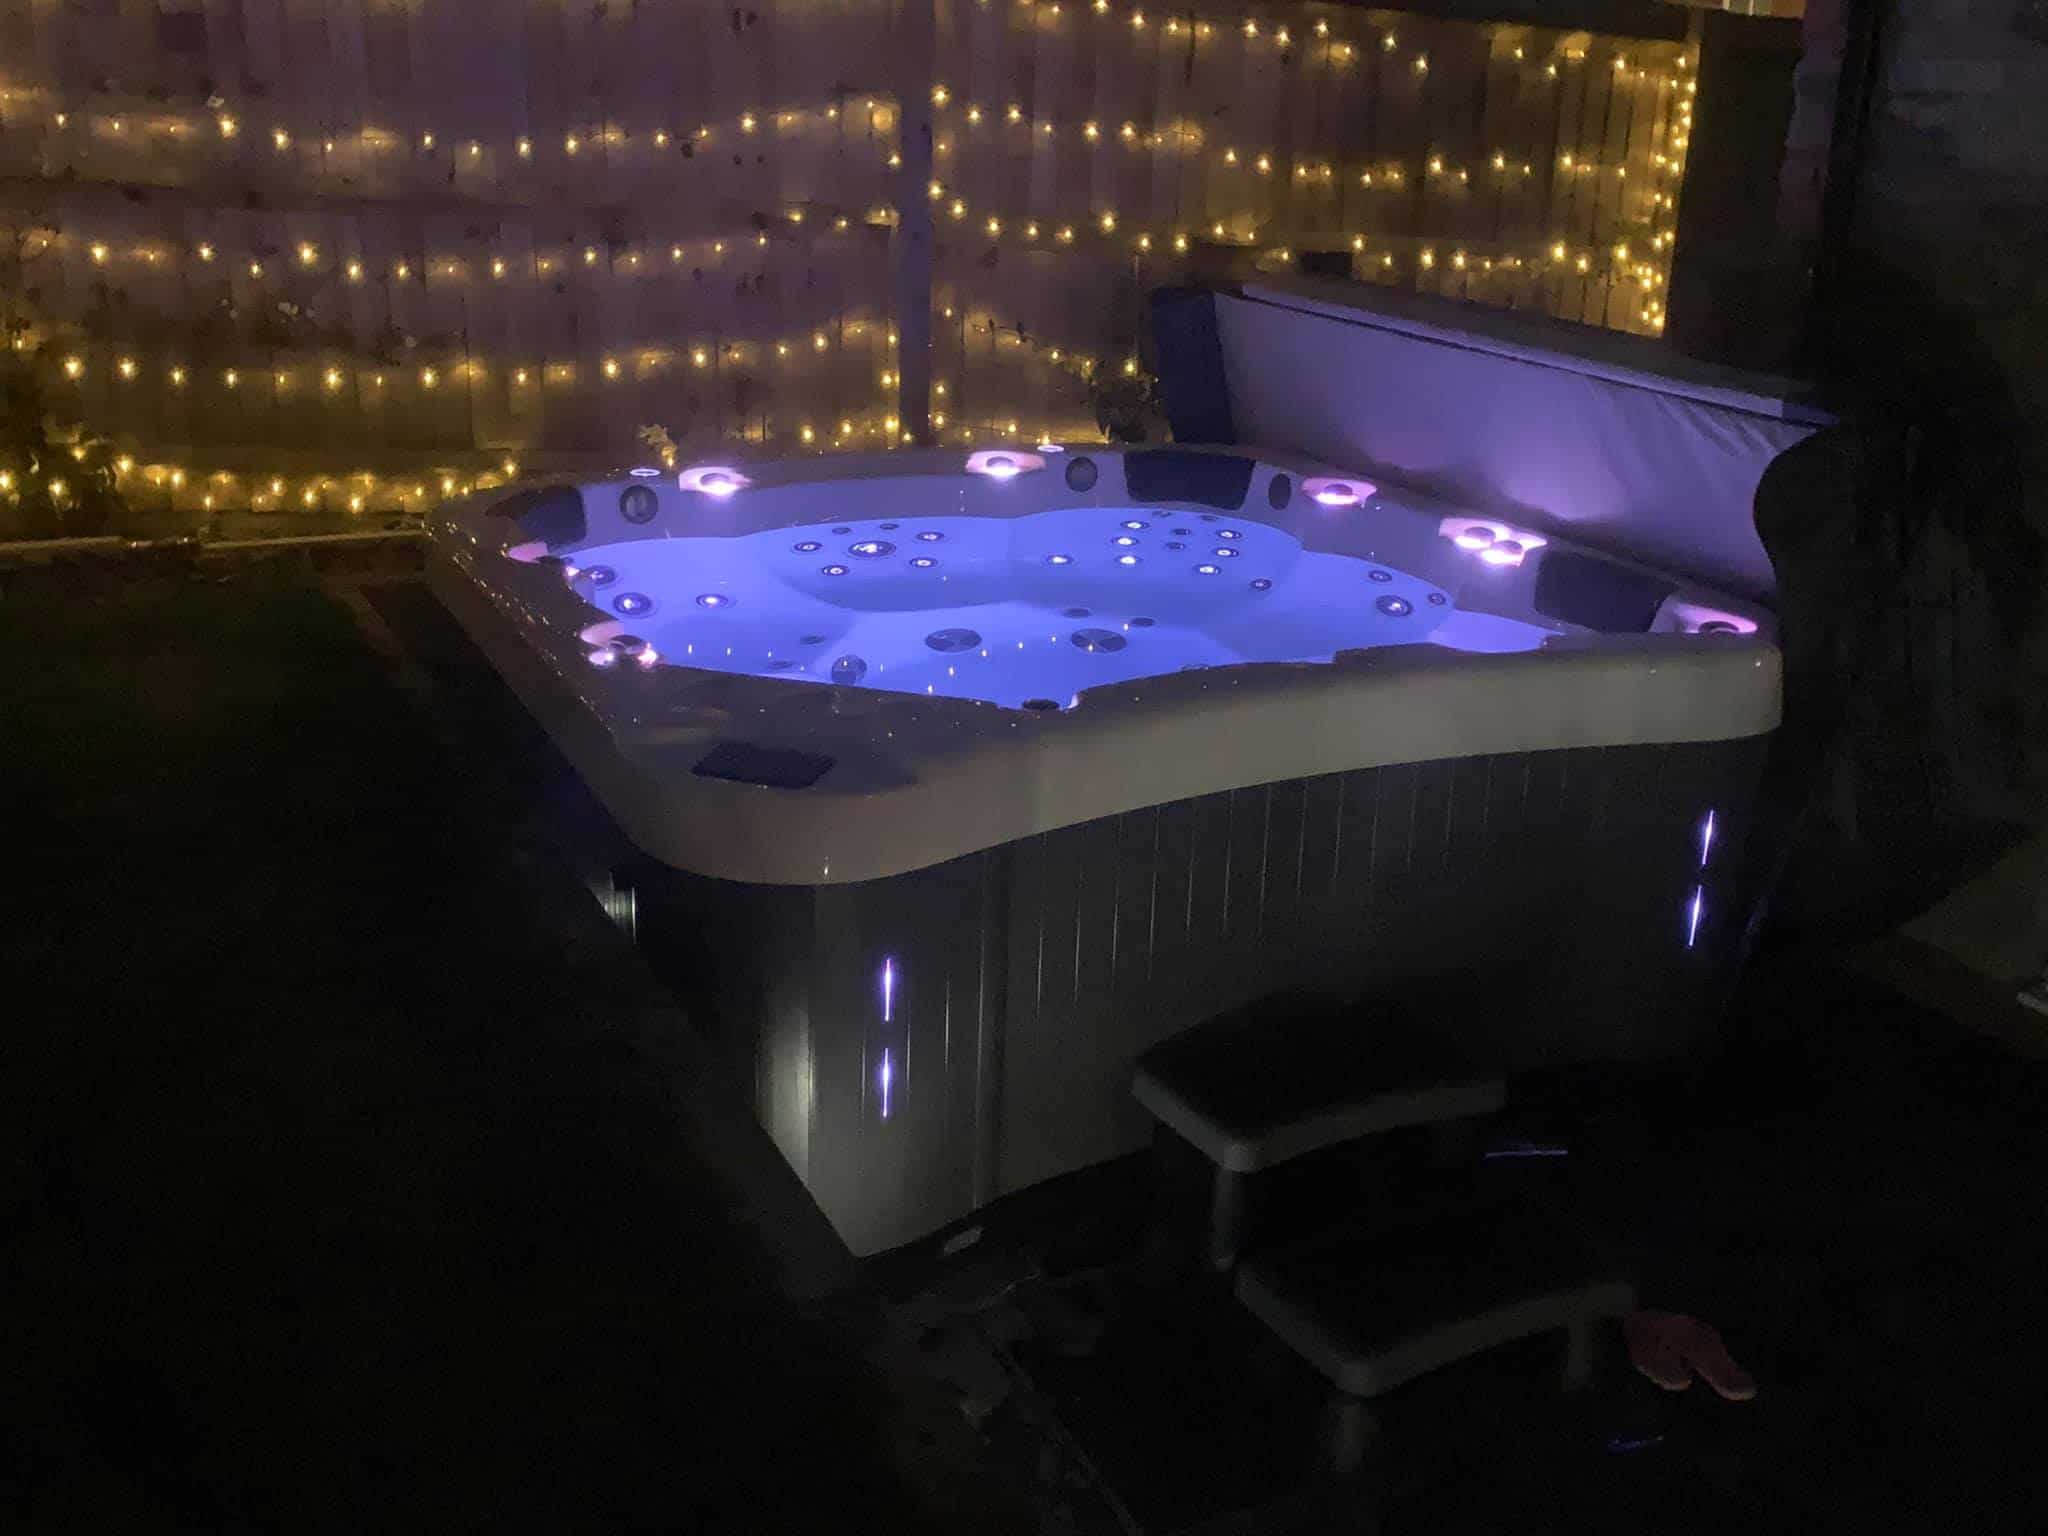 Be Well E680 Luxury Hot Tub review